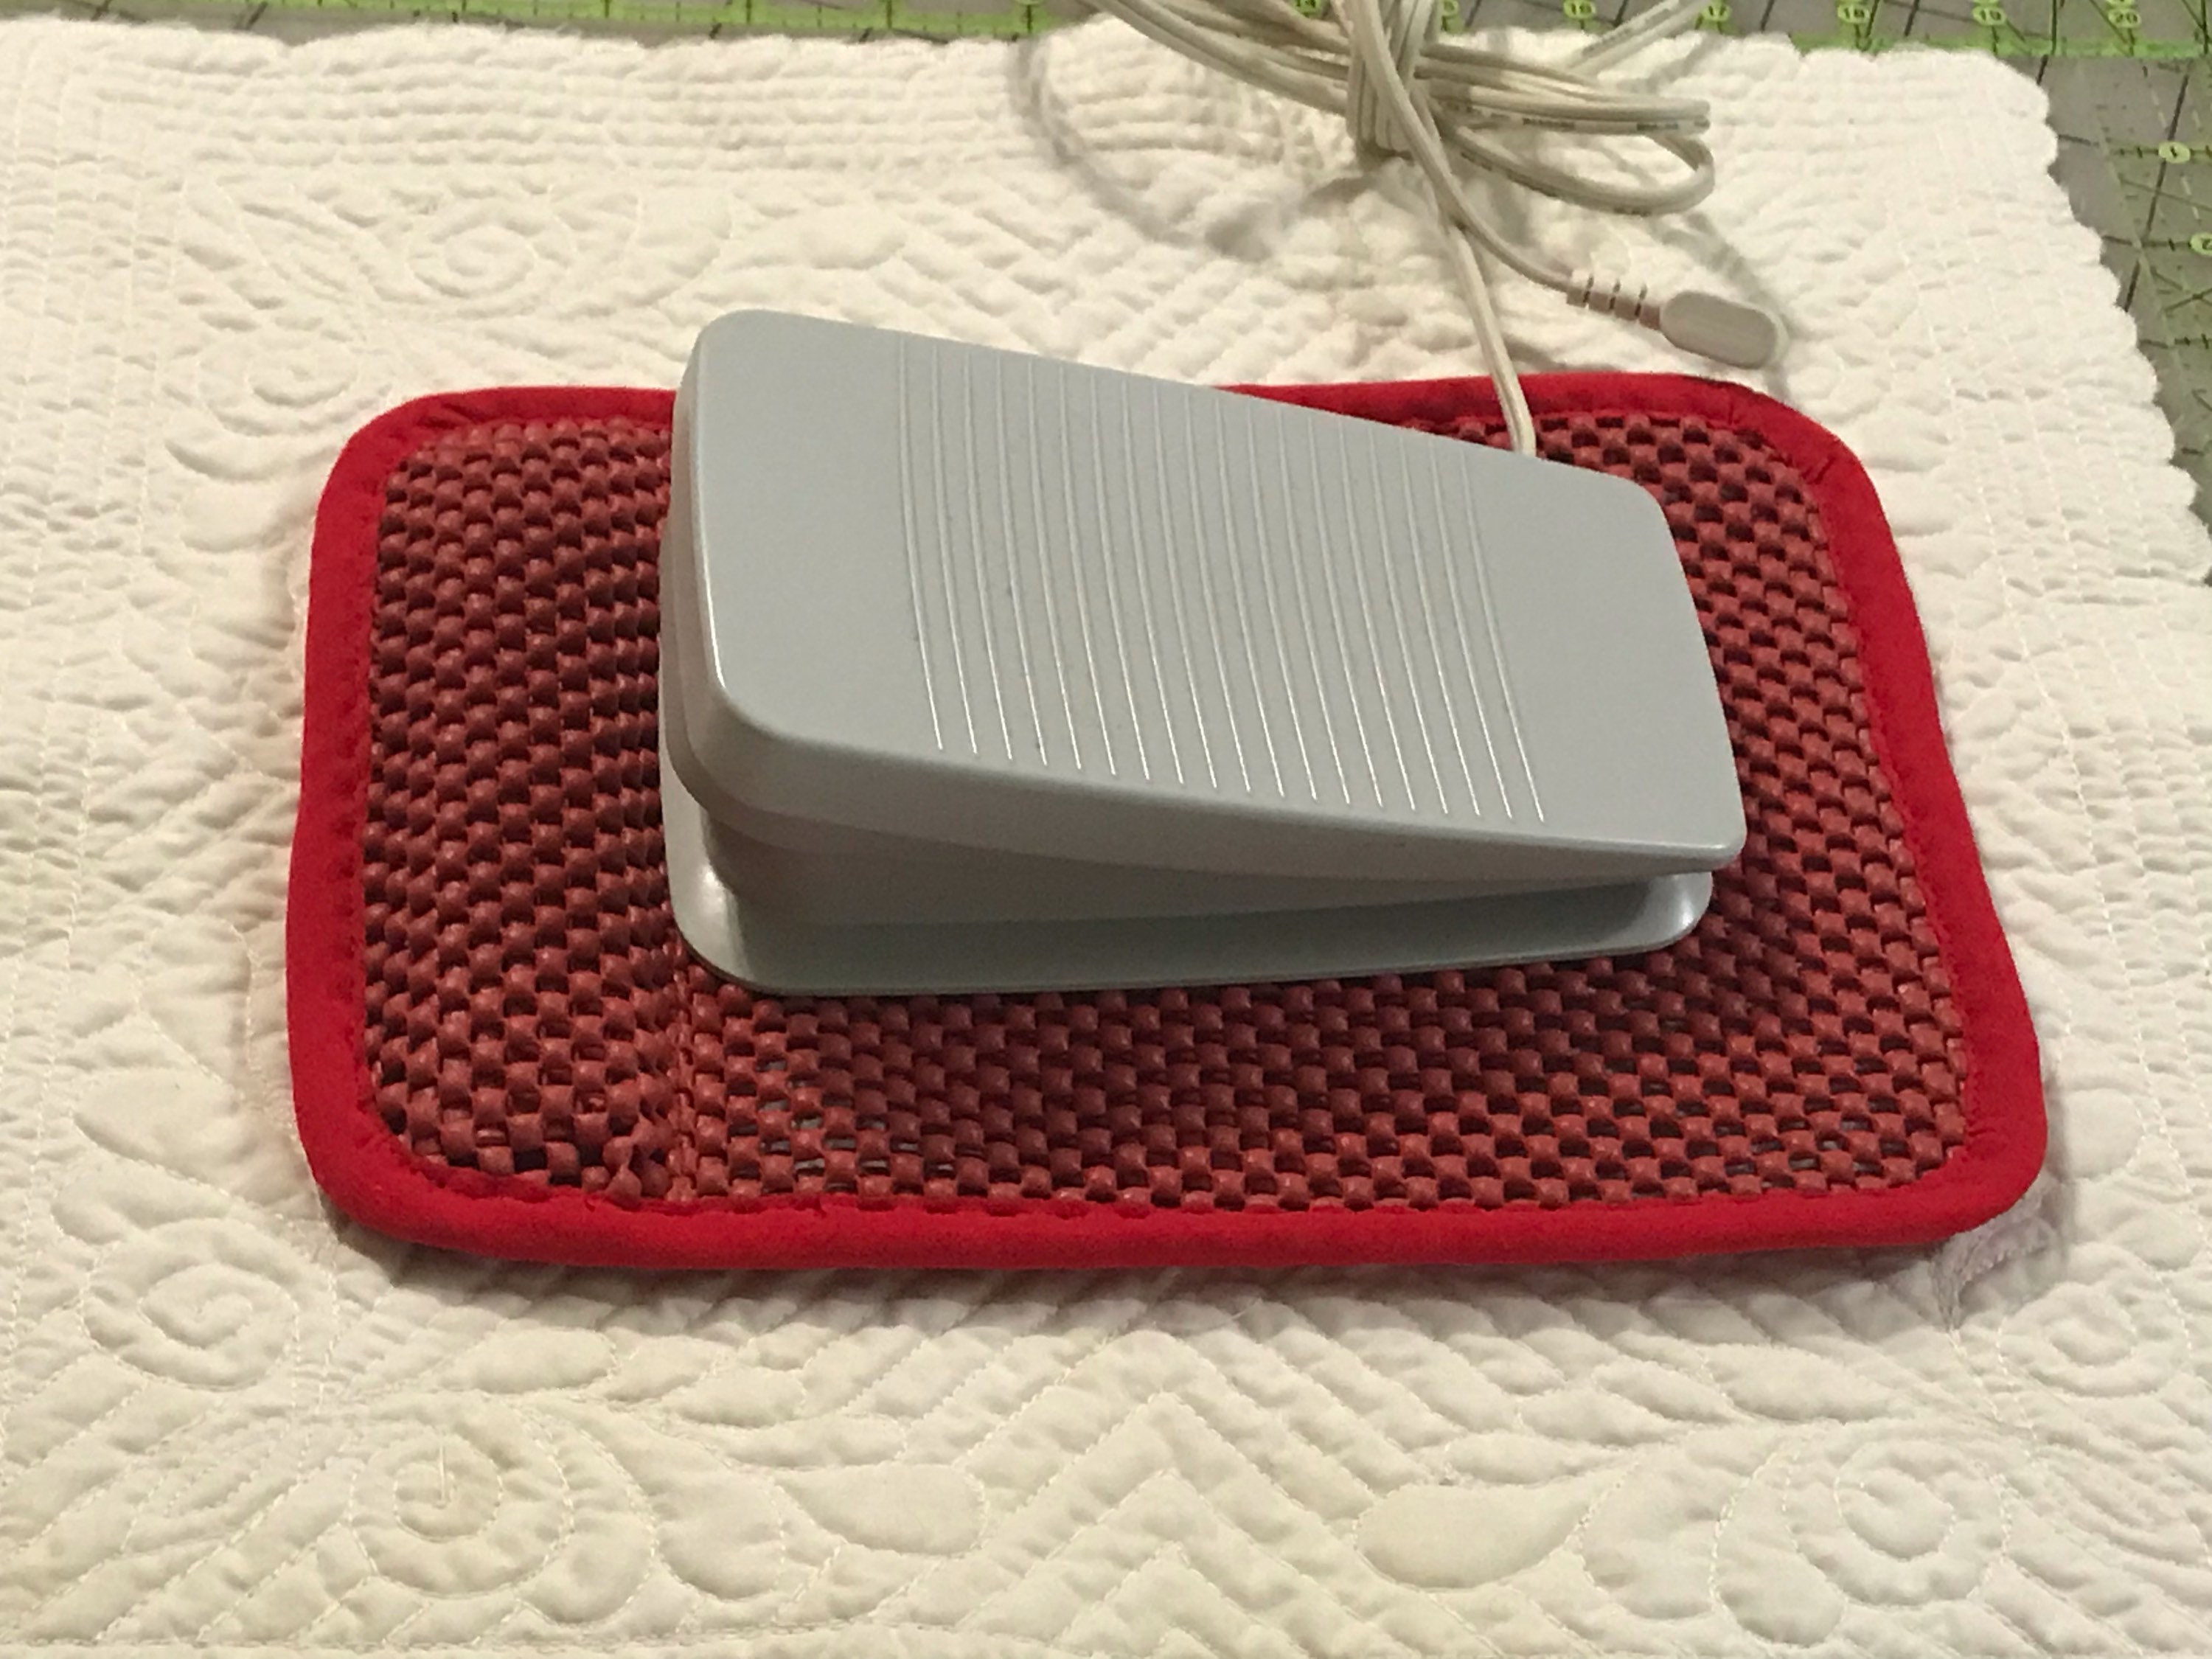 How to sew a non-slip foot pedal pad for a sewing machine or a